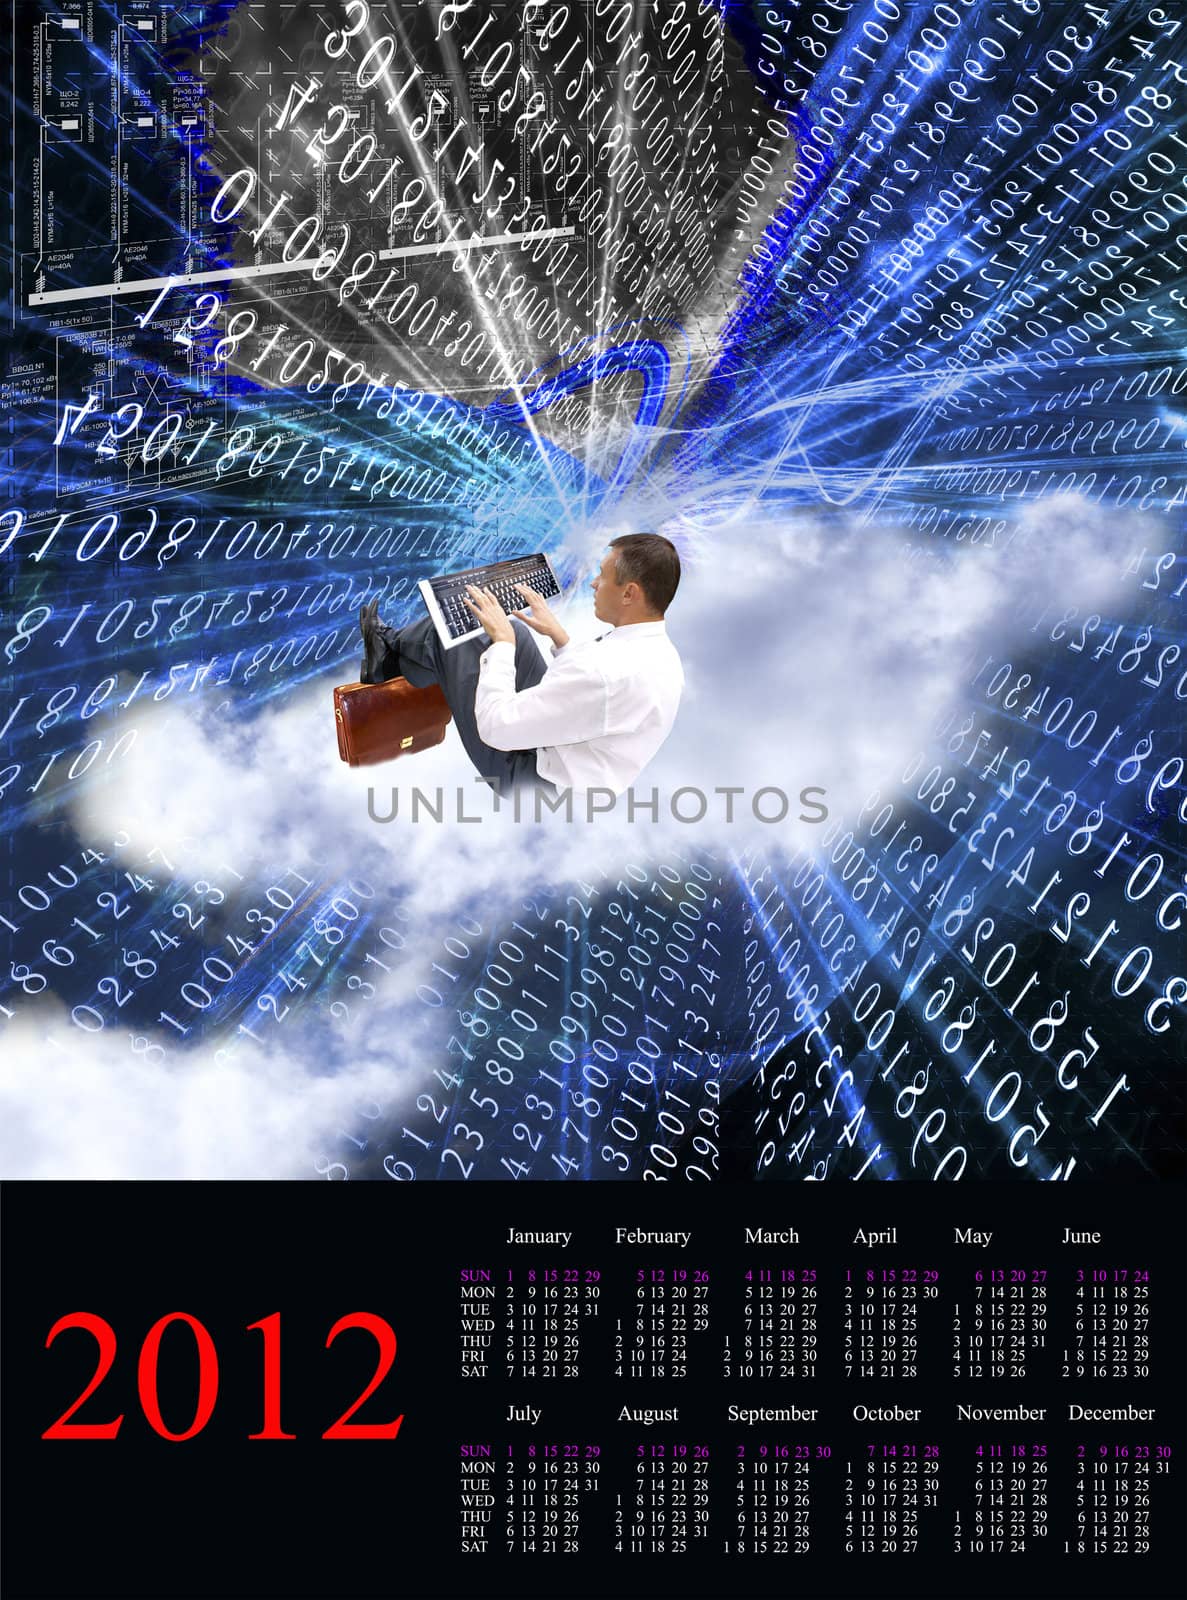 The newest the technology Internet solve global information problems